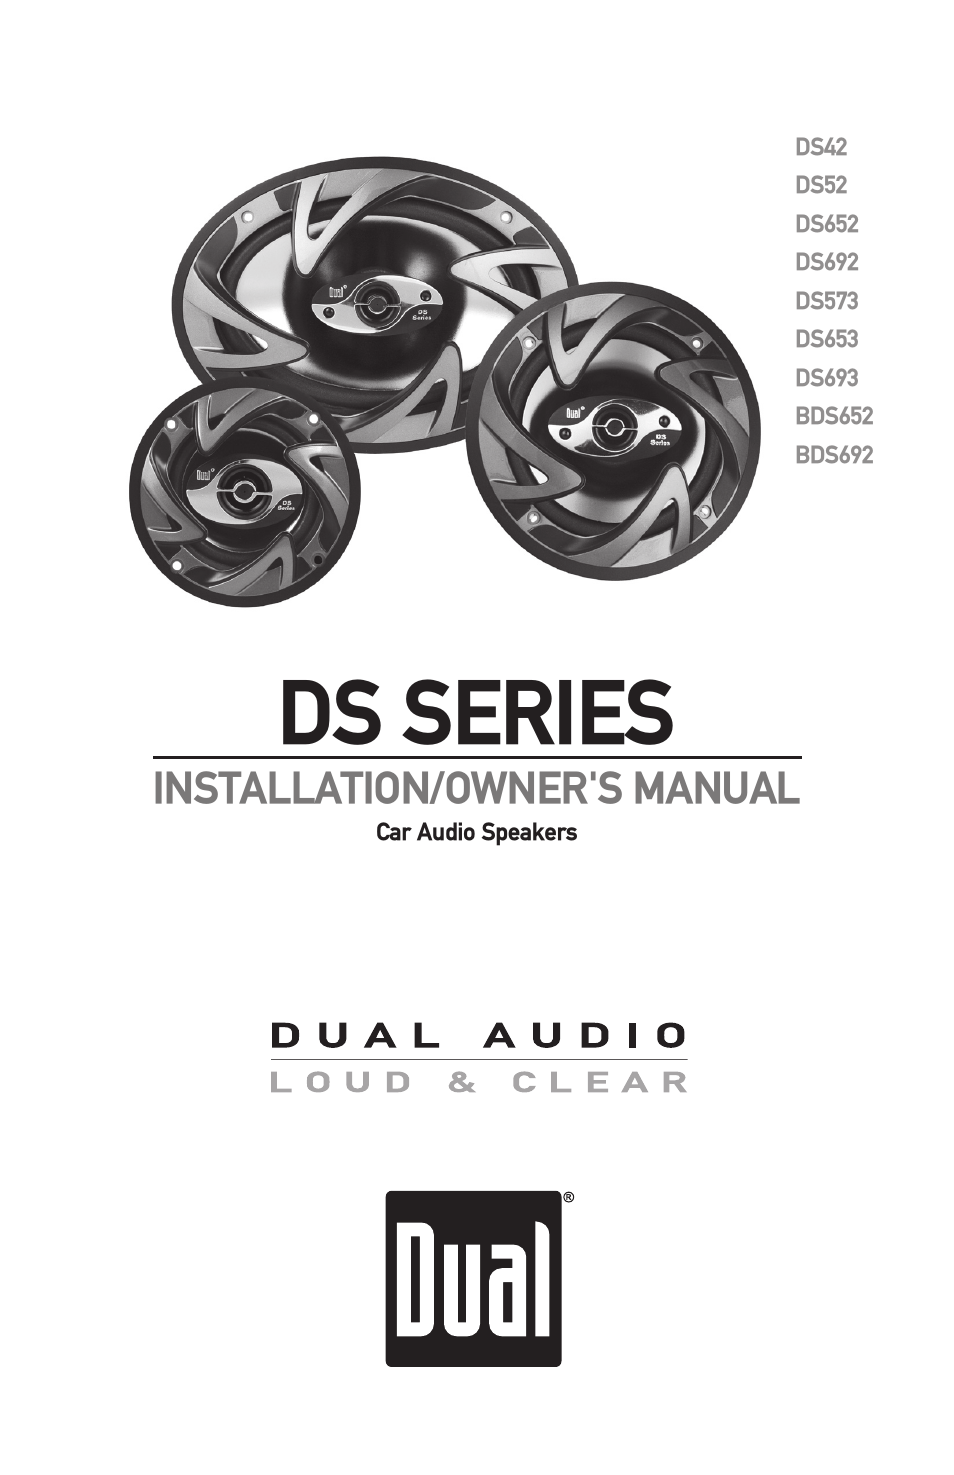 DS SERIES DS653